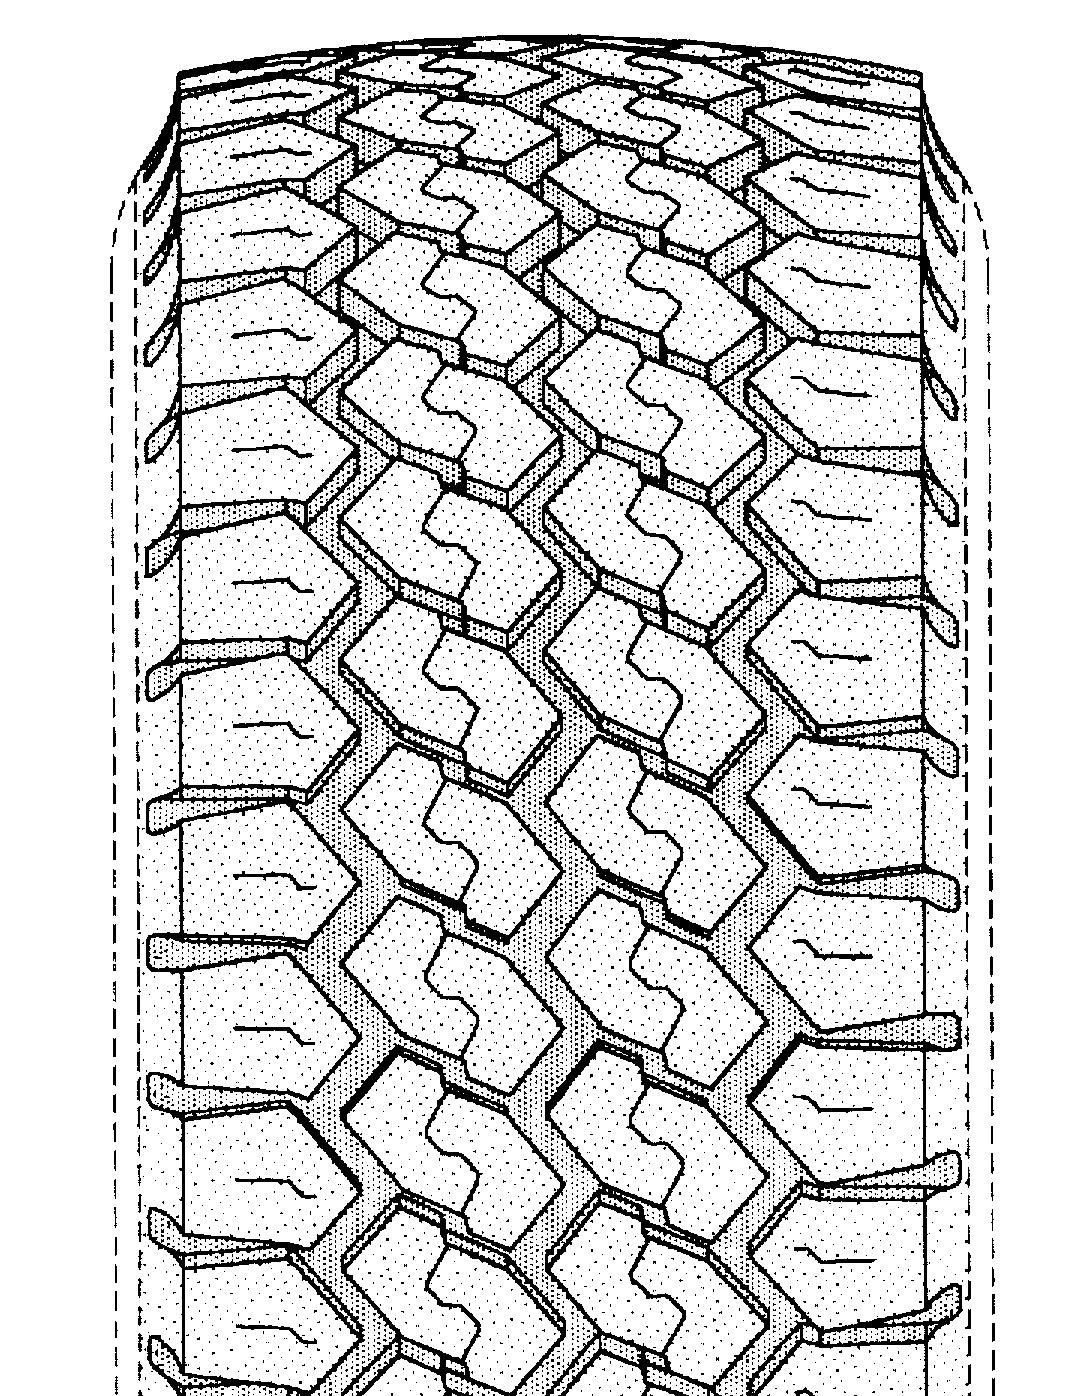 Example of nondirectional type tire tread with interruptedequatorial  circumferential groove. 
